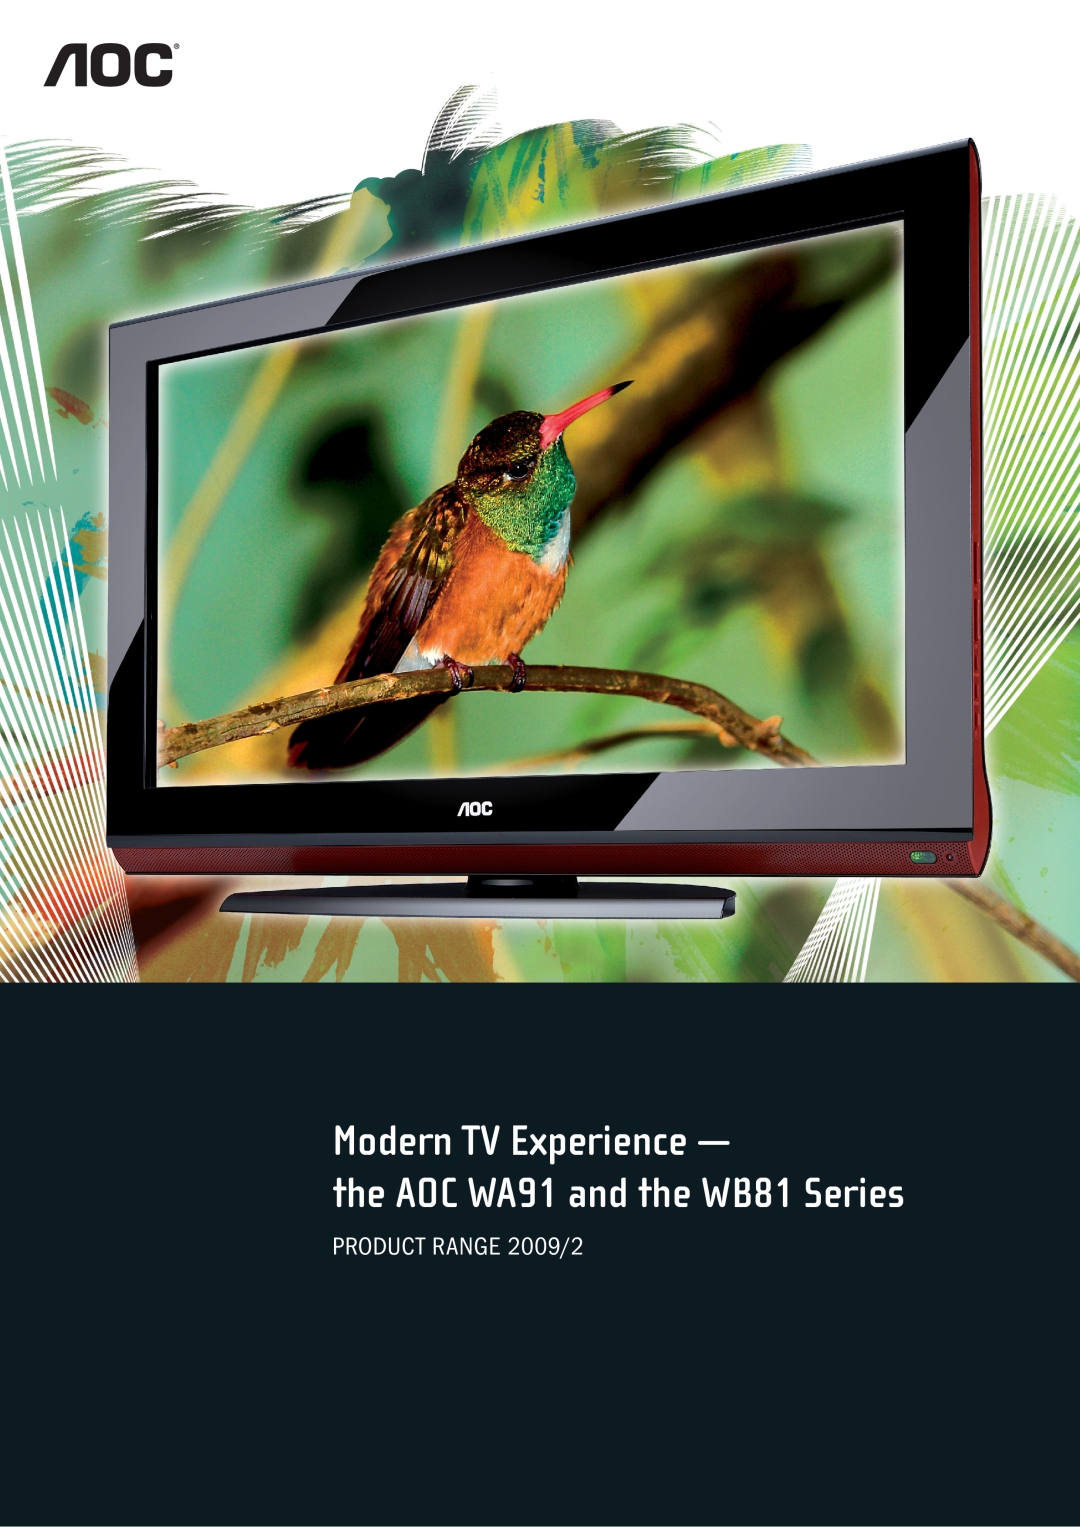 AOC manual Modern TV Experience, the AOC WA91 and the WB81 Series, PRODUCT RANGE 2009/2 